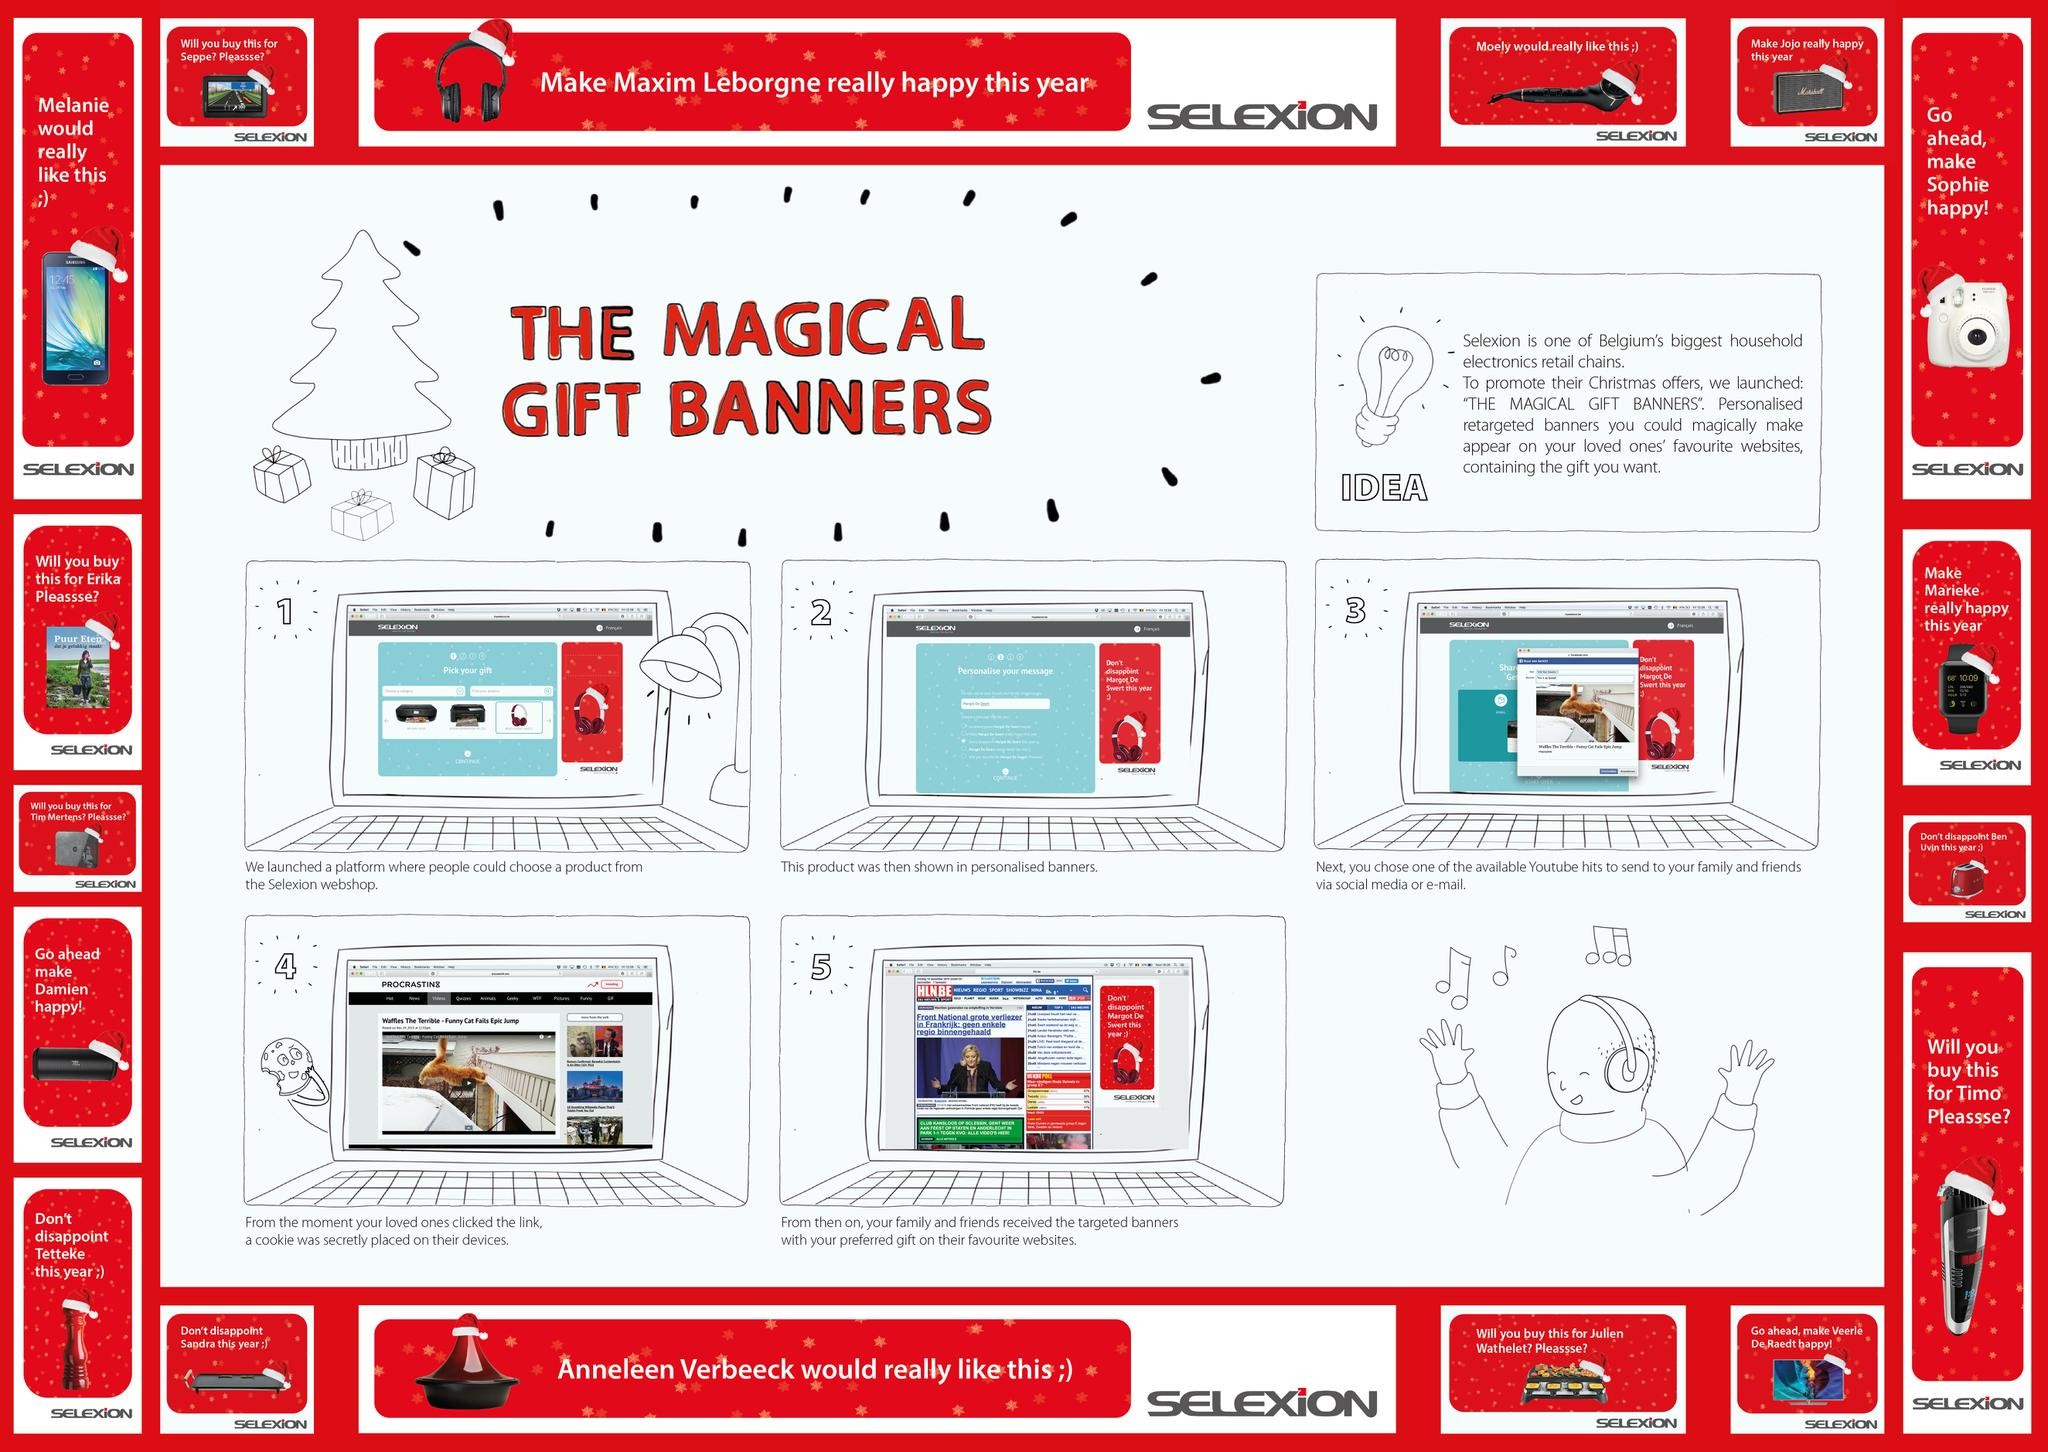 The Magical Gift Banners